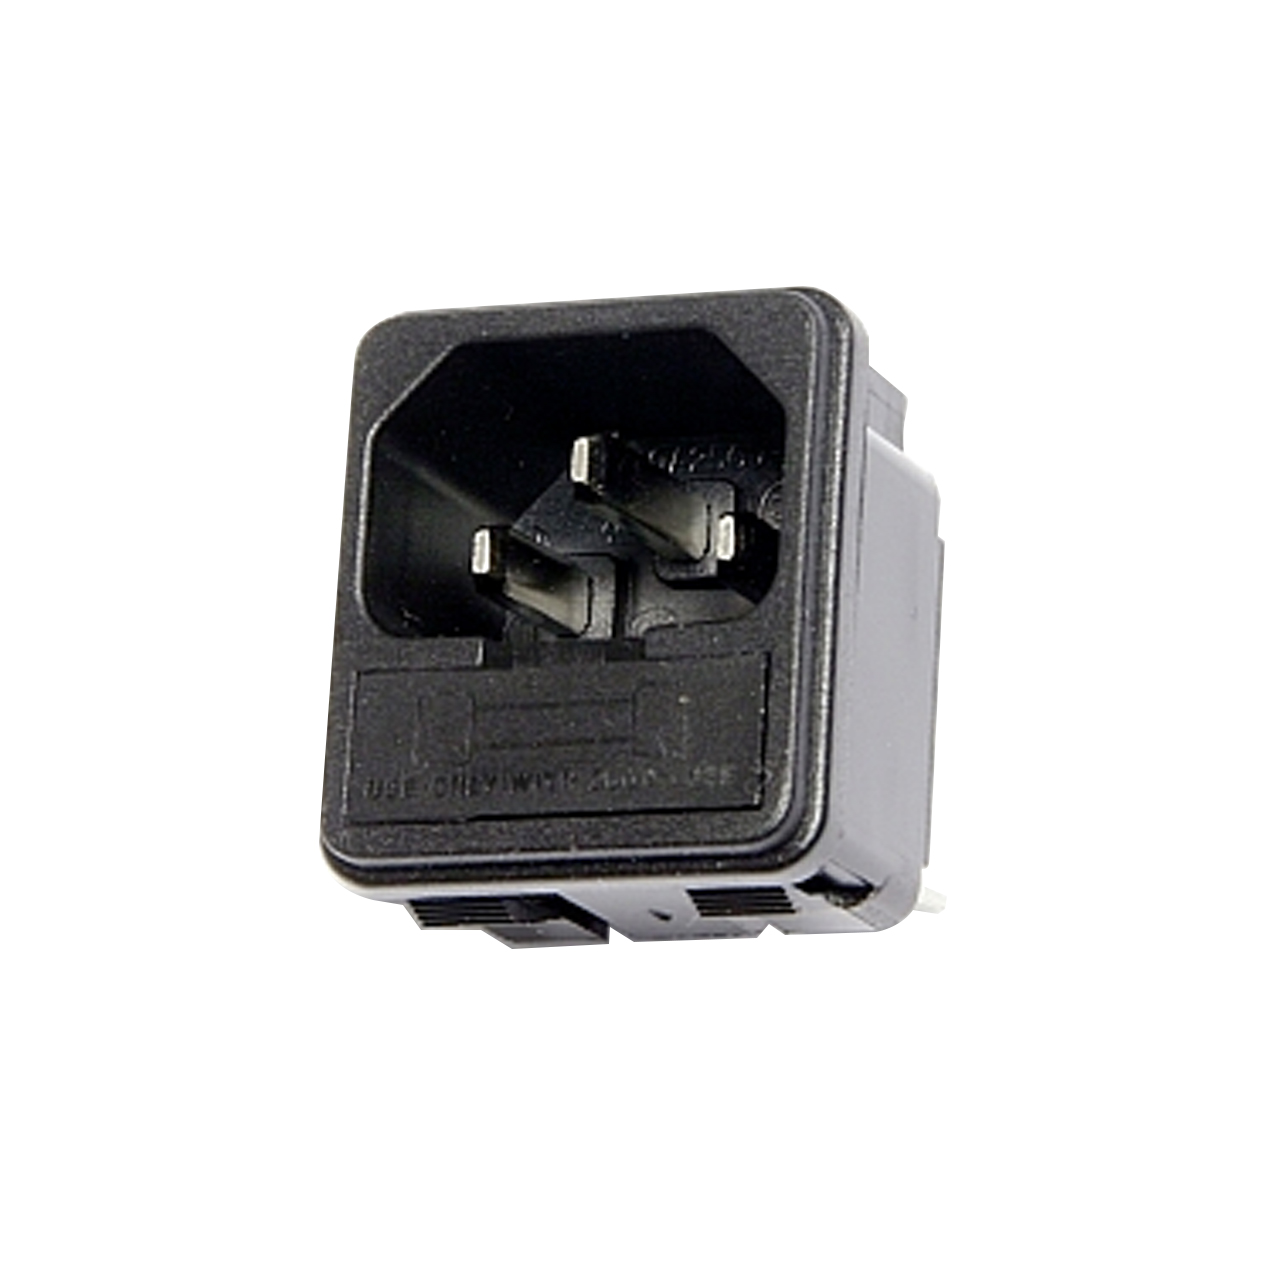 Power connector IEC 60320 C14 fused